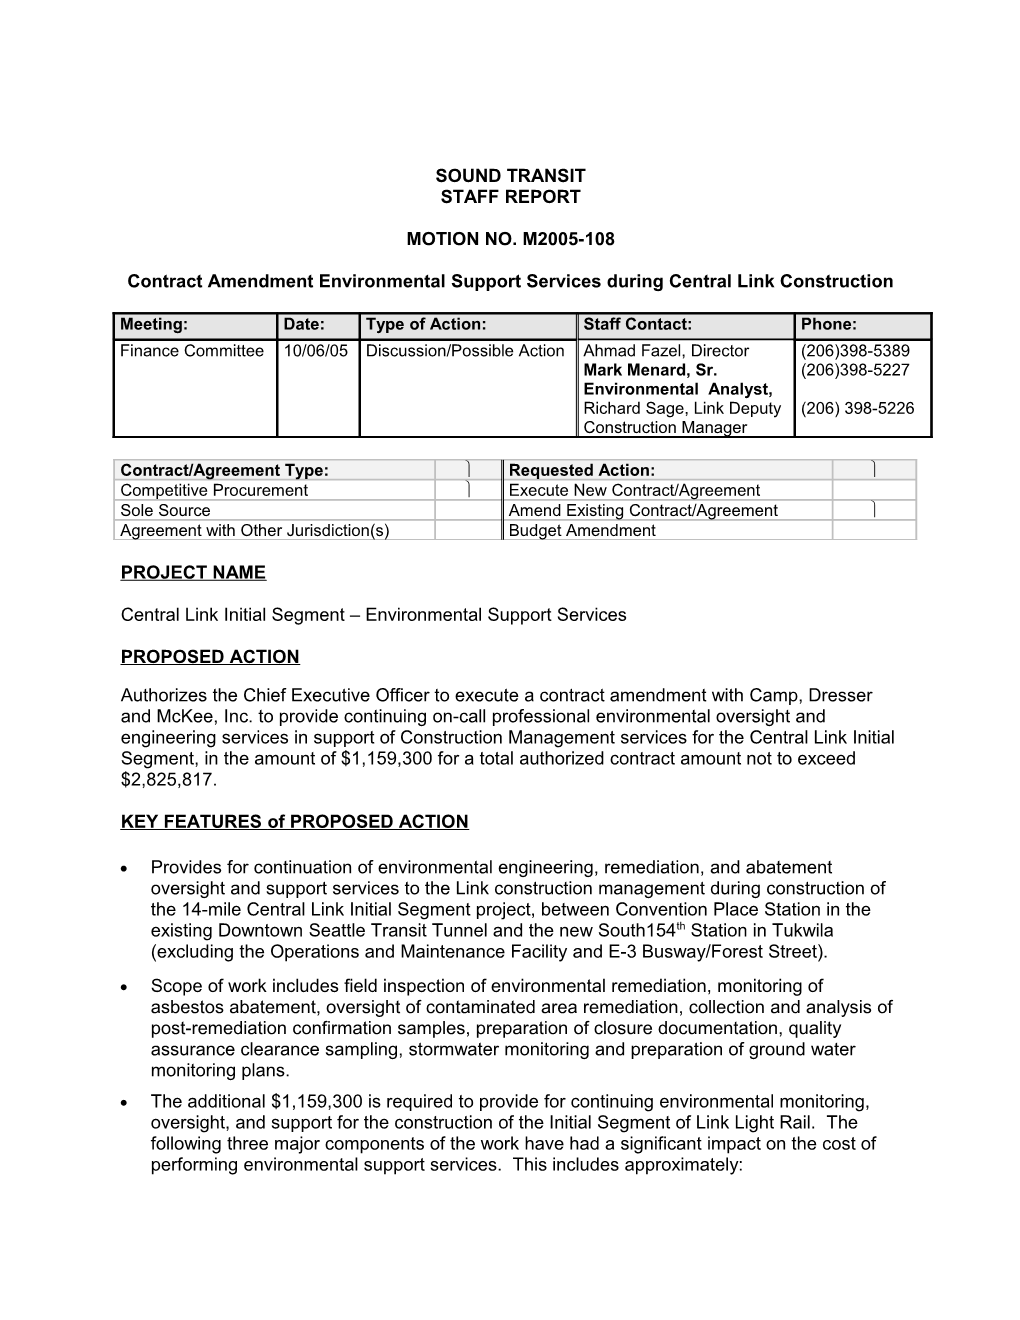 Contract Amendment Environmental Support Services During Central Link Construction